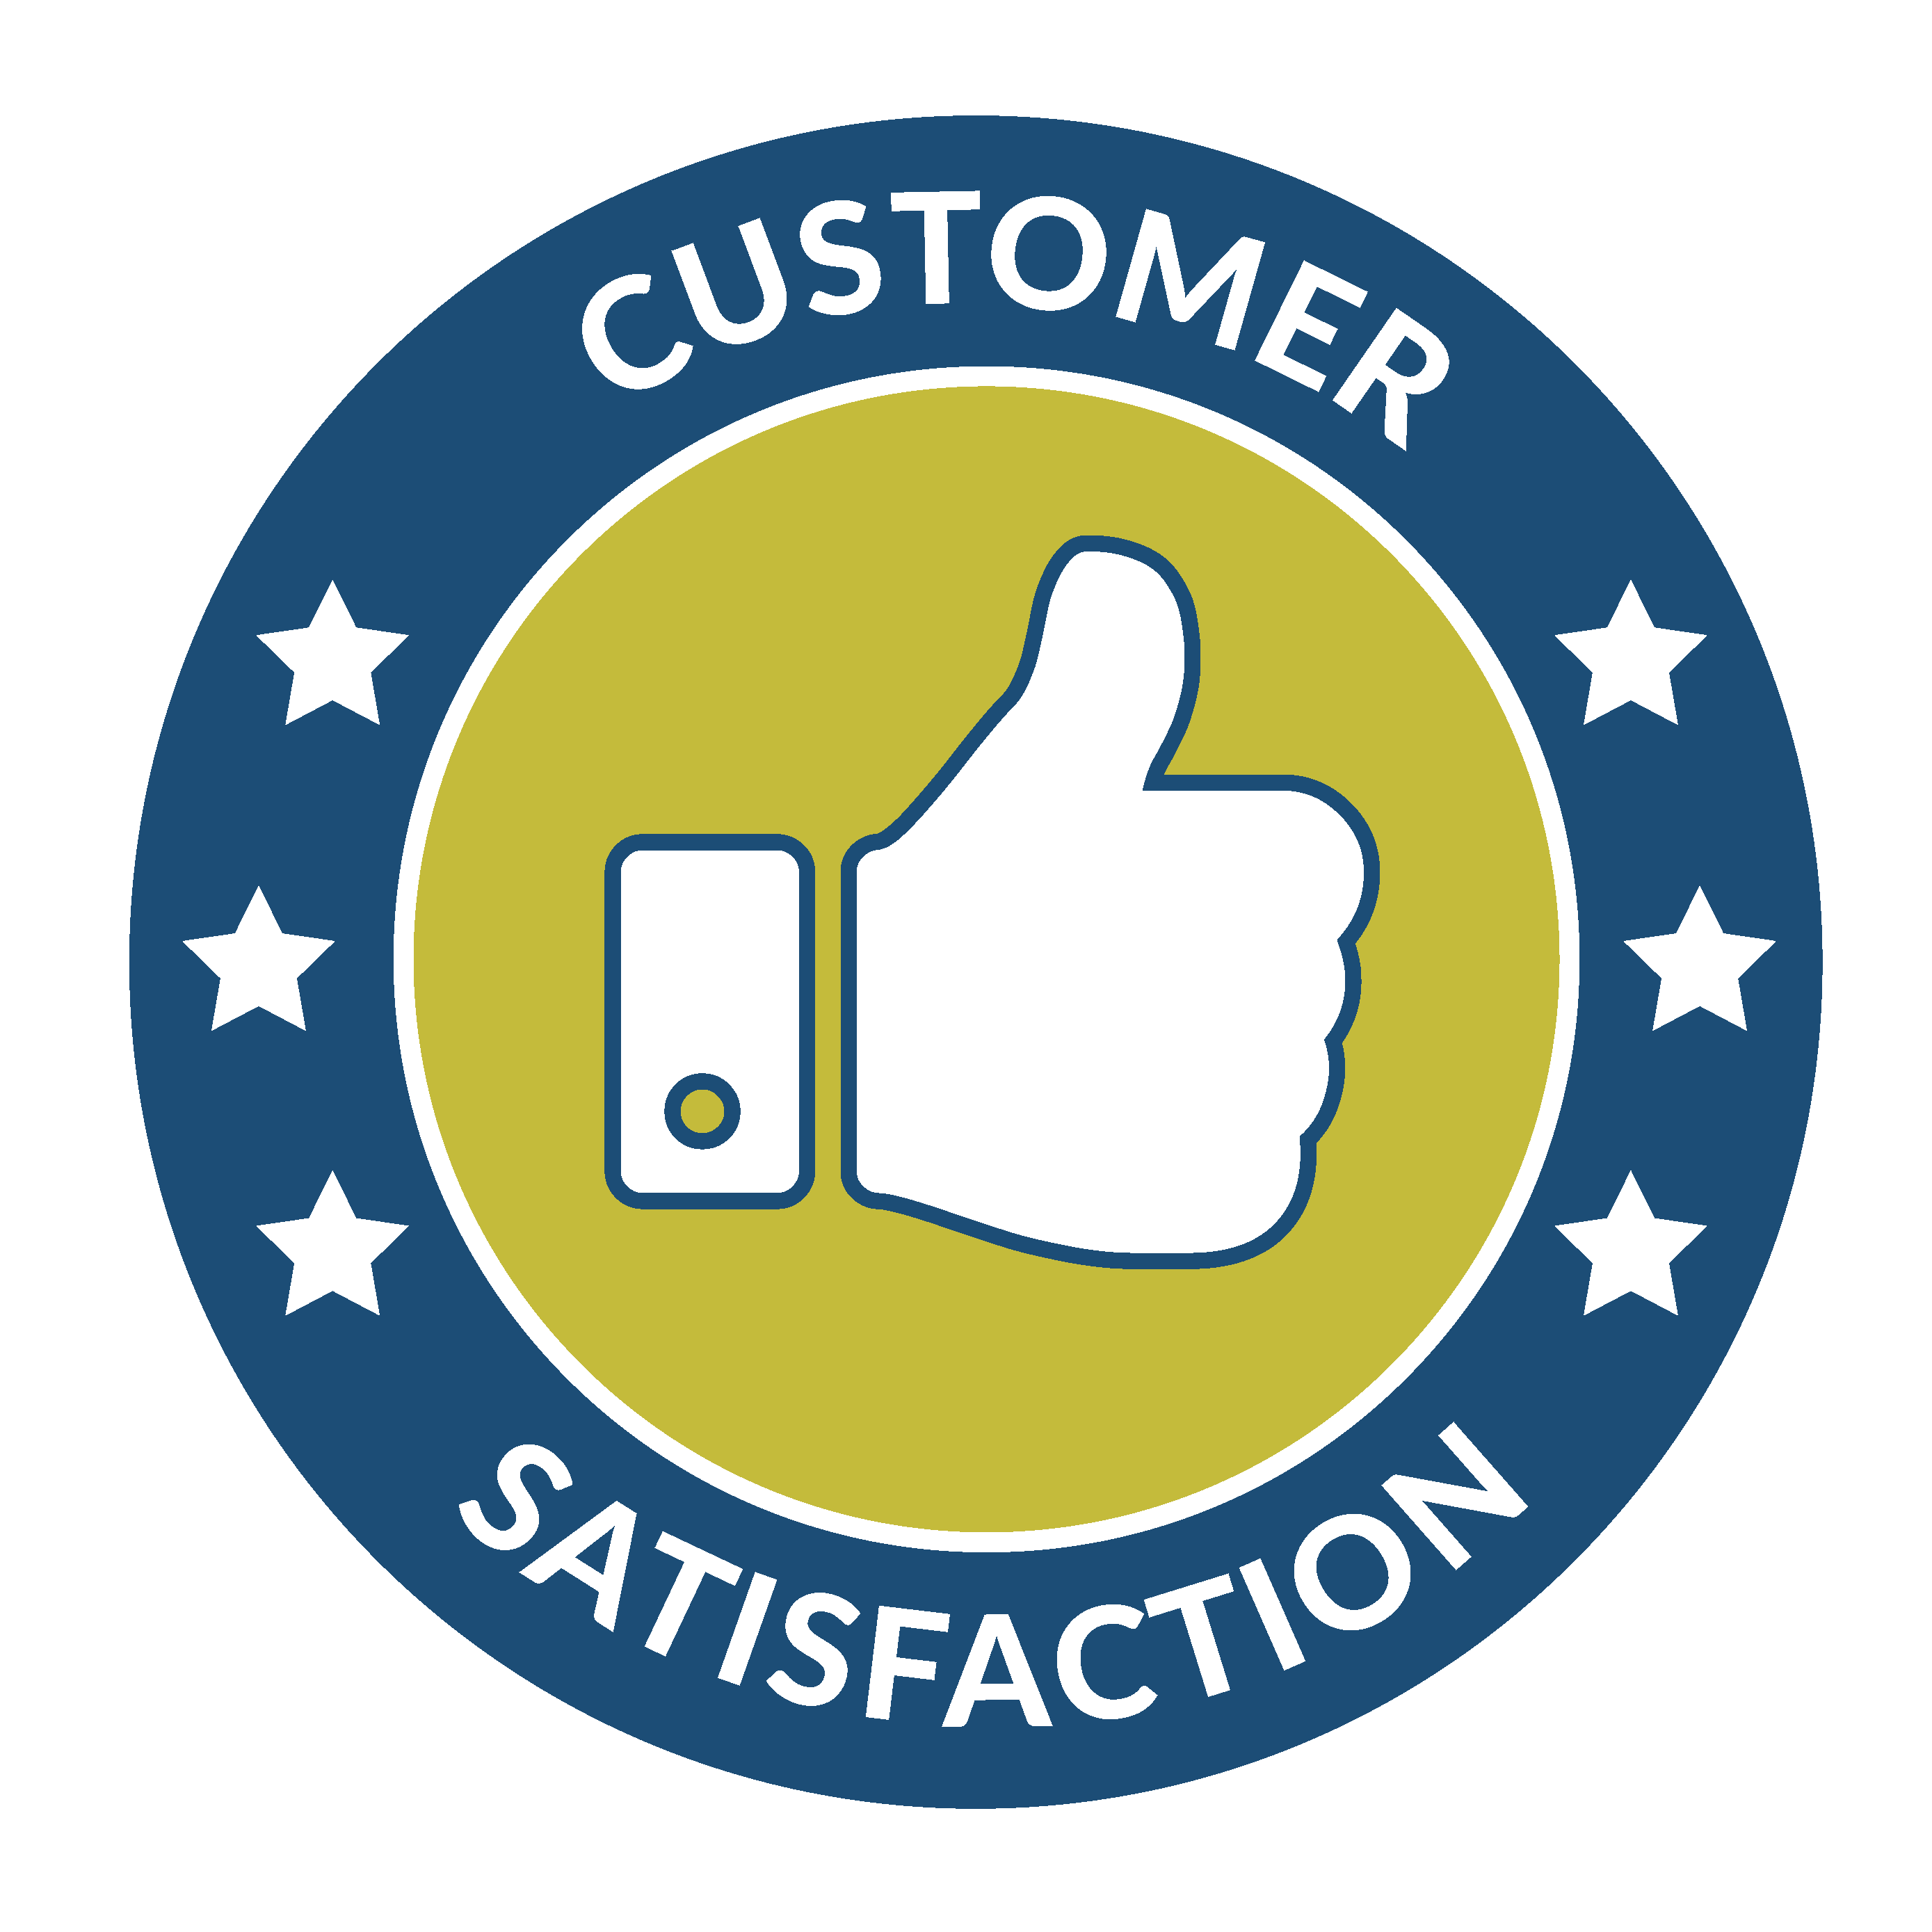 Printing Services Customer Satisfaction